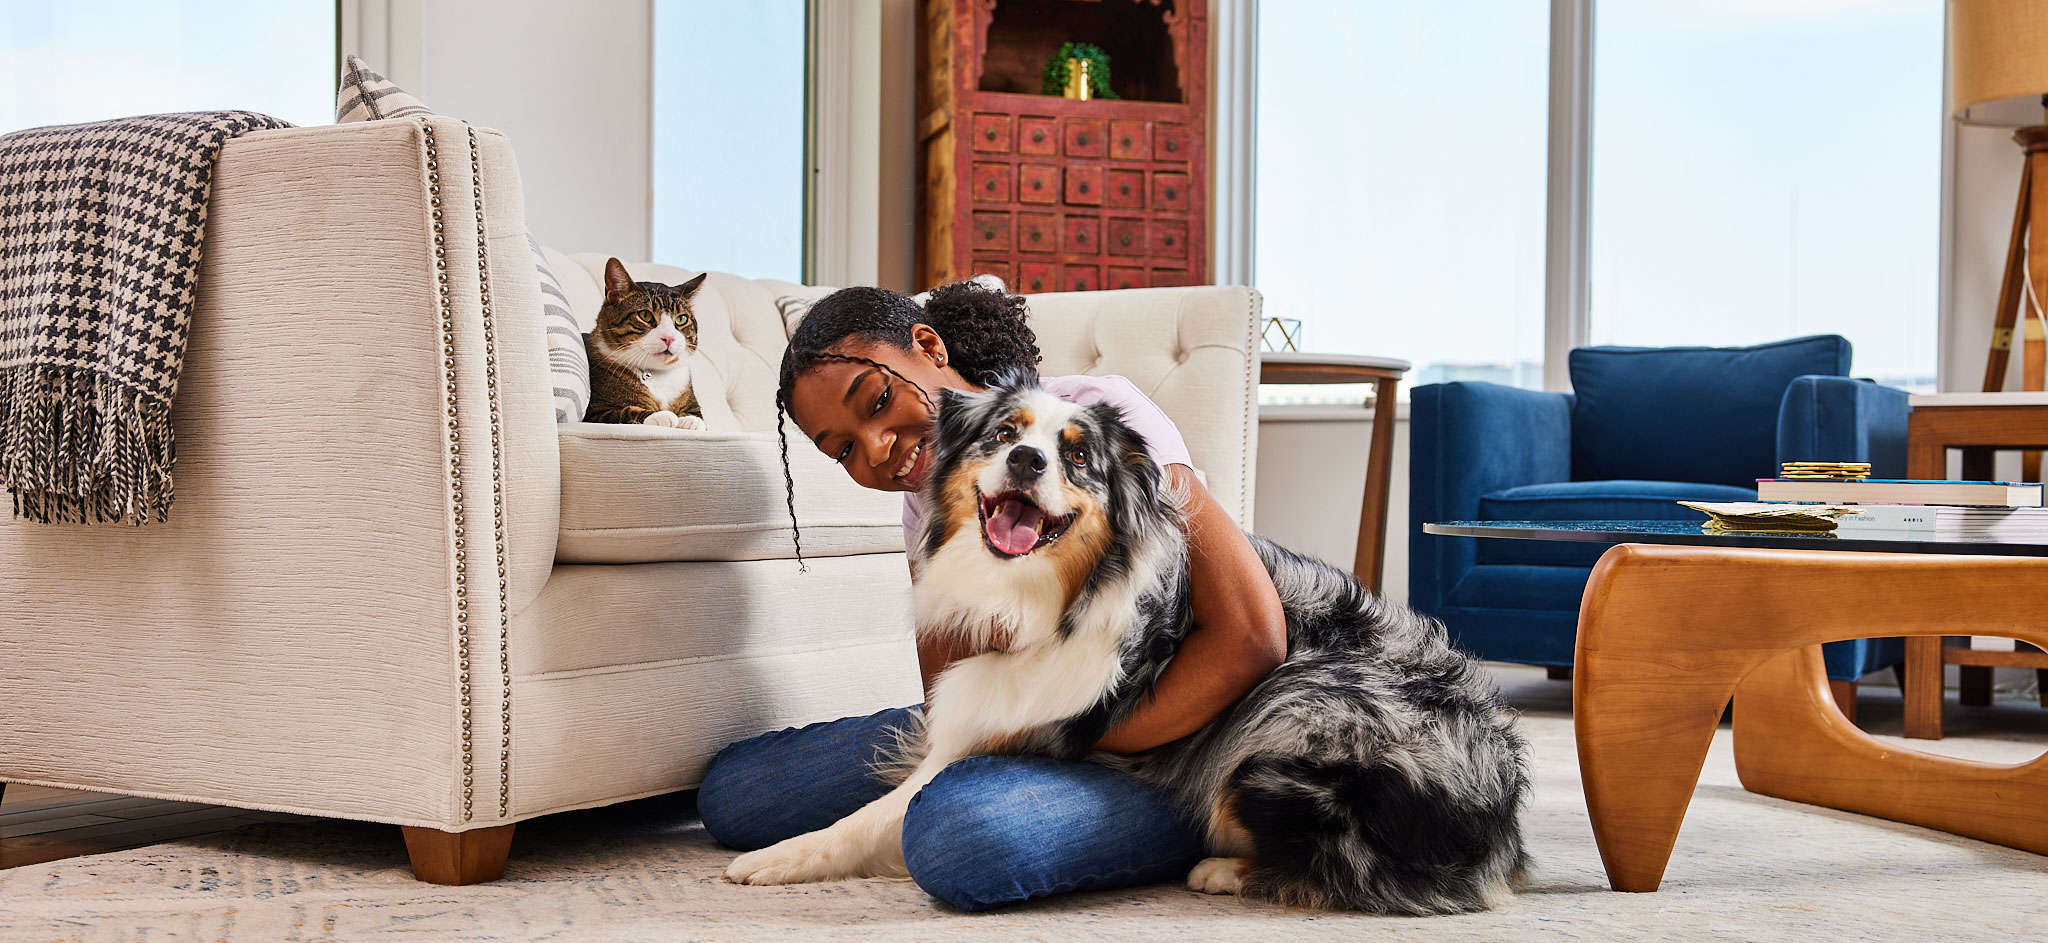 Working with our team of veterinarians, animal nutritionists, and food scientists, Wellness® achieves a steadfast focus of supporting a pet’s wellbeing by upholding our Wellness Nutritional Philosophy. Wellness dog food and Wellness cat food.